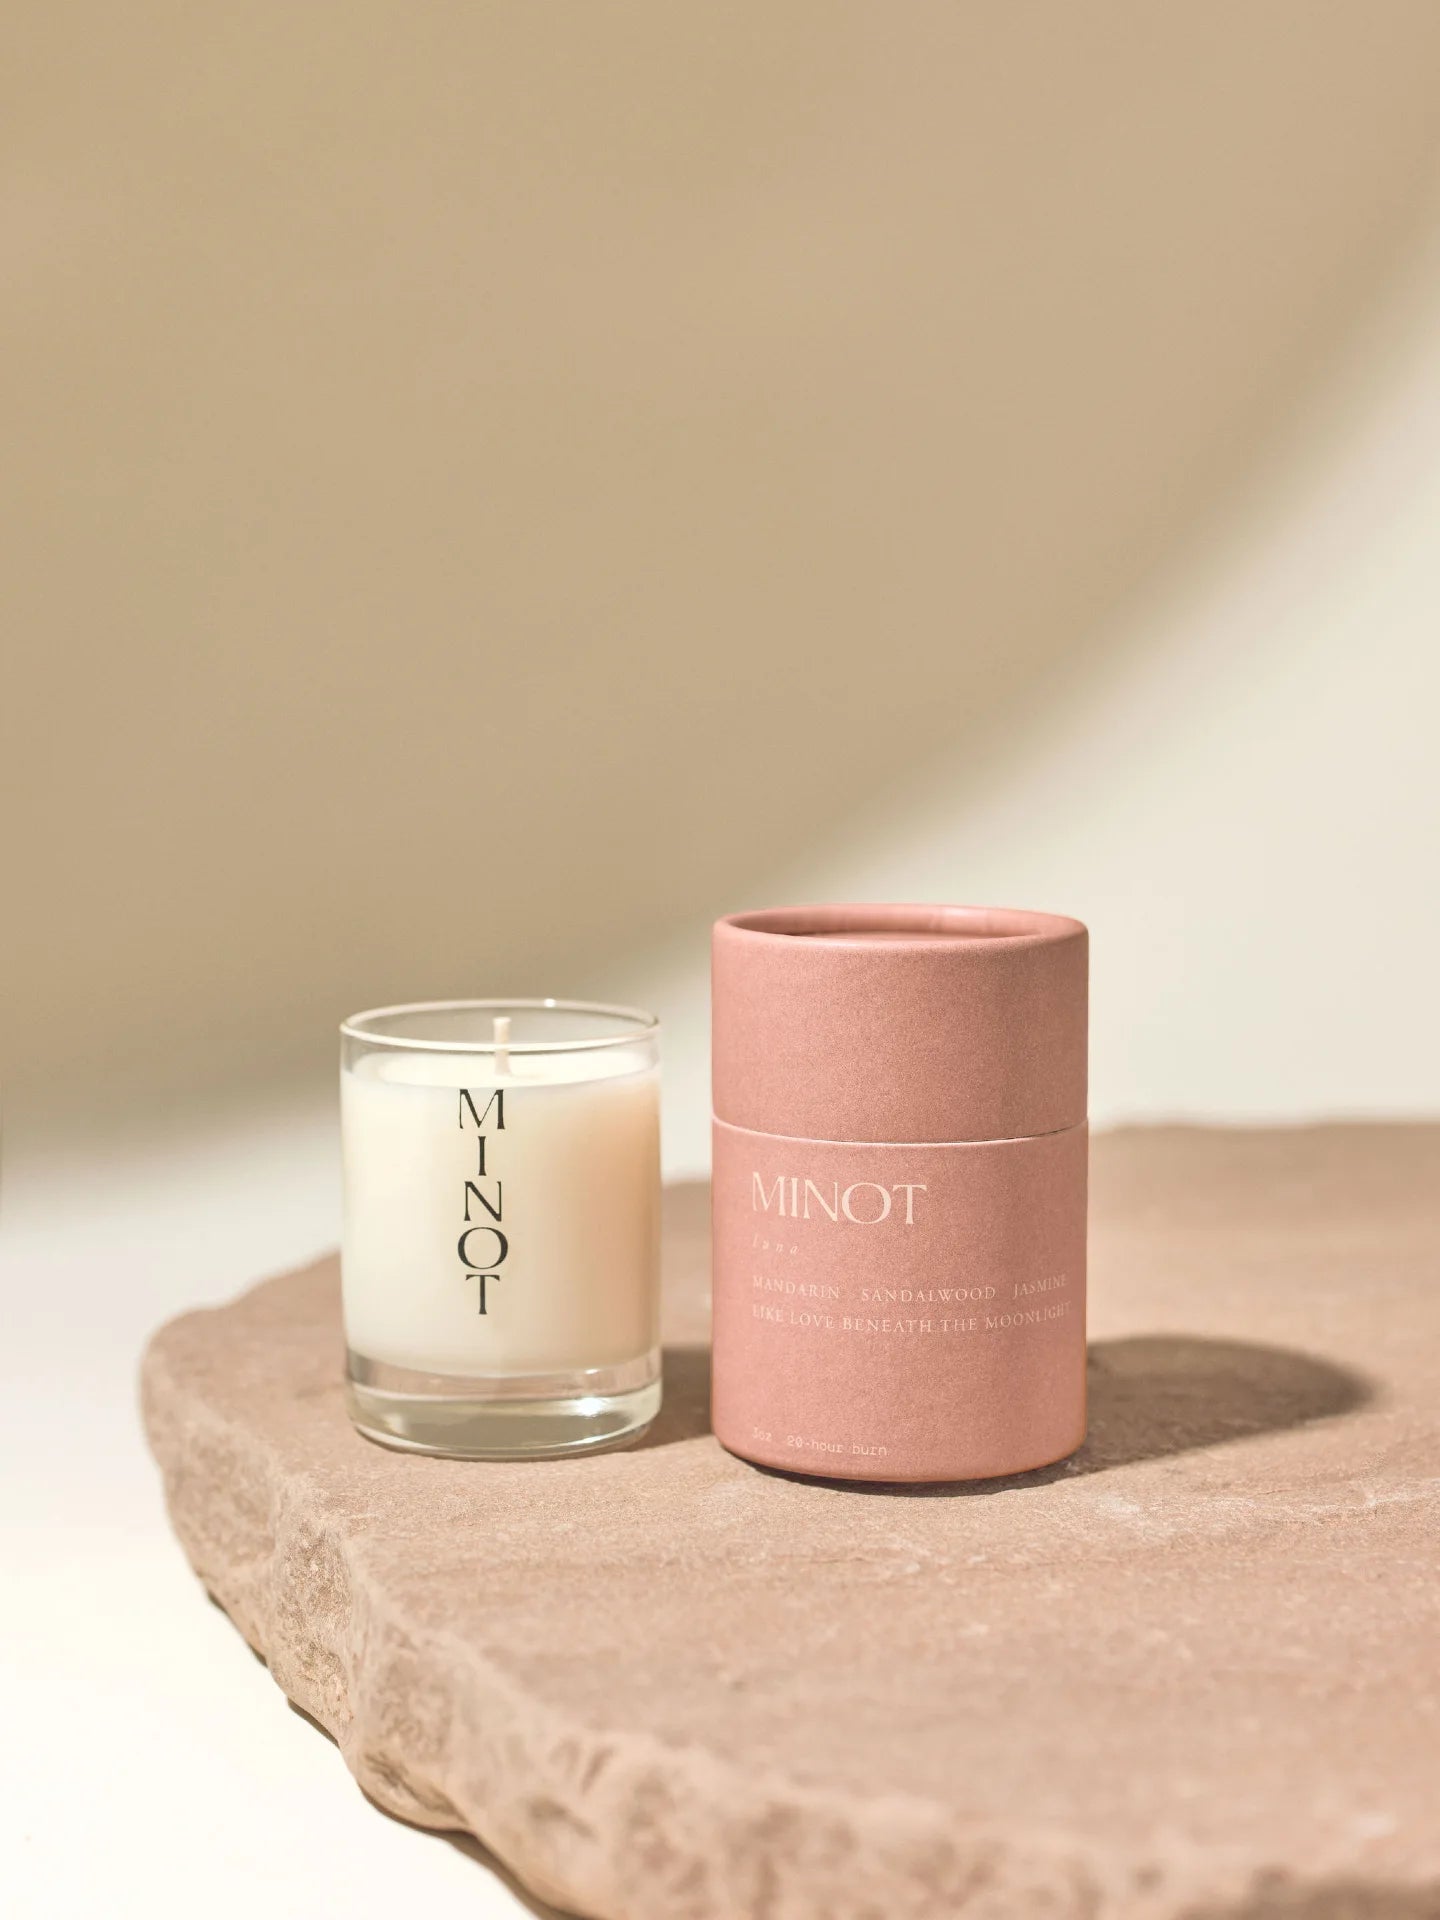 The Luna Mini candle is a clean-burning travel candle with mandarin, jasmine, and sandalwood scents